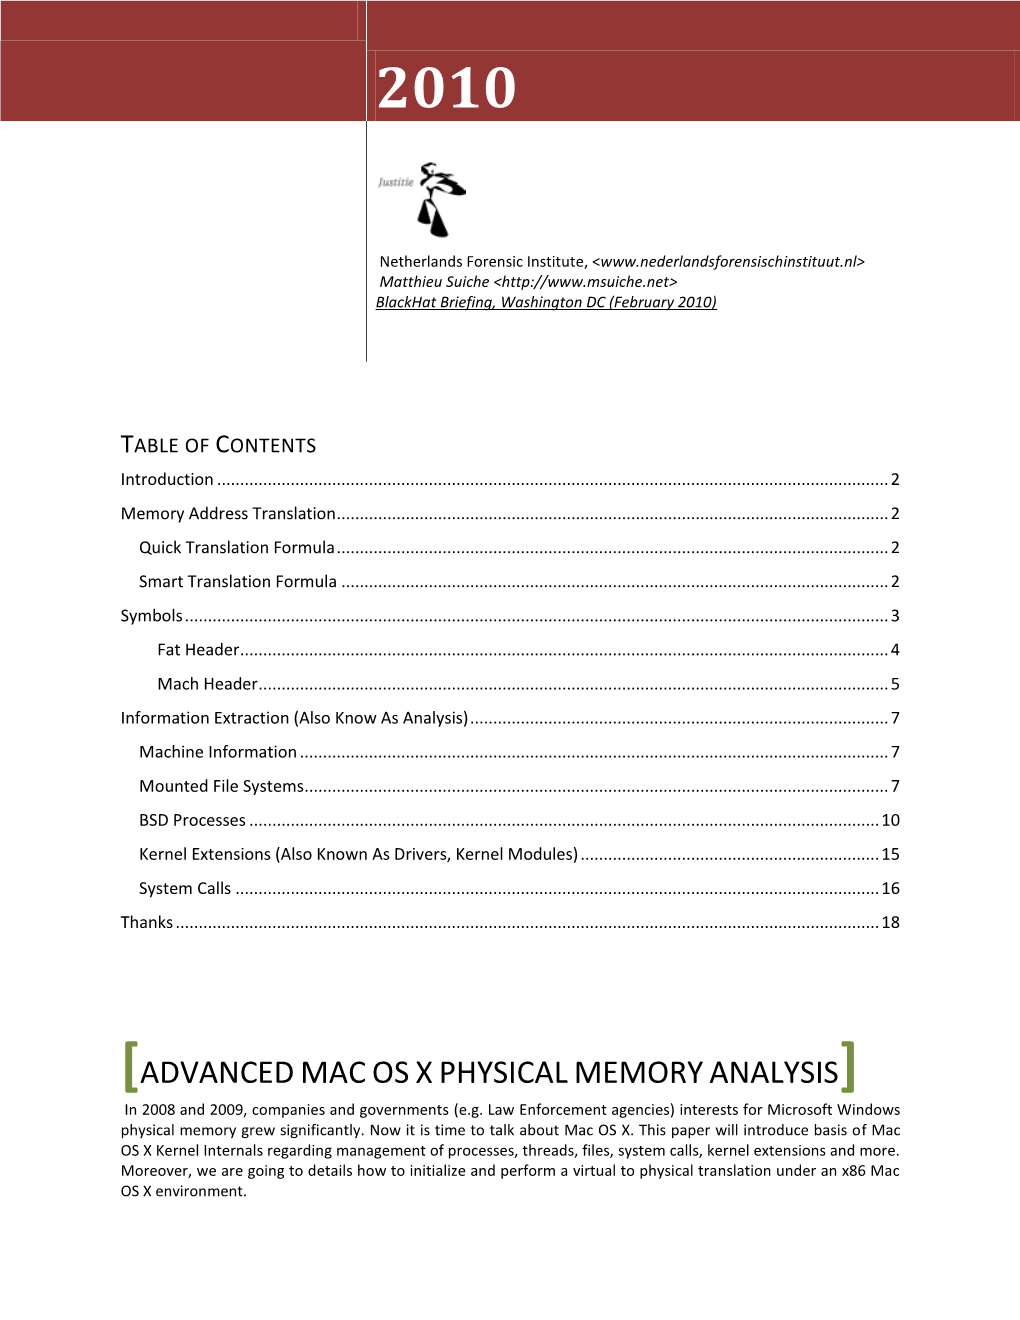 ADVANCED MAC OS X PHYSICAL MEMORY ANALYSIS] in 2008 and 2009, Companies and Governments (E.G